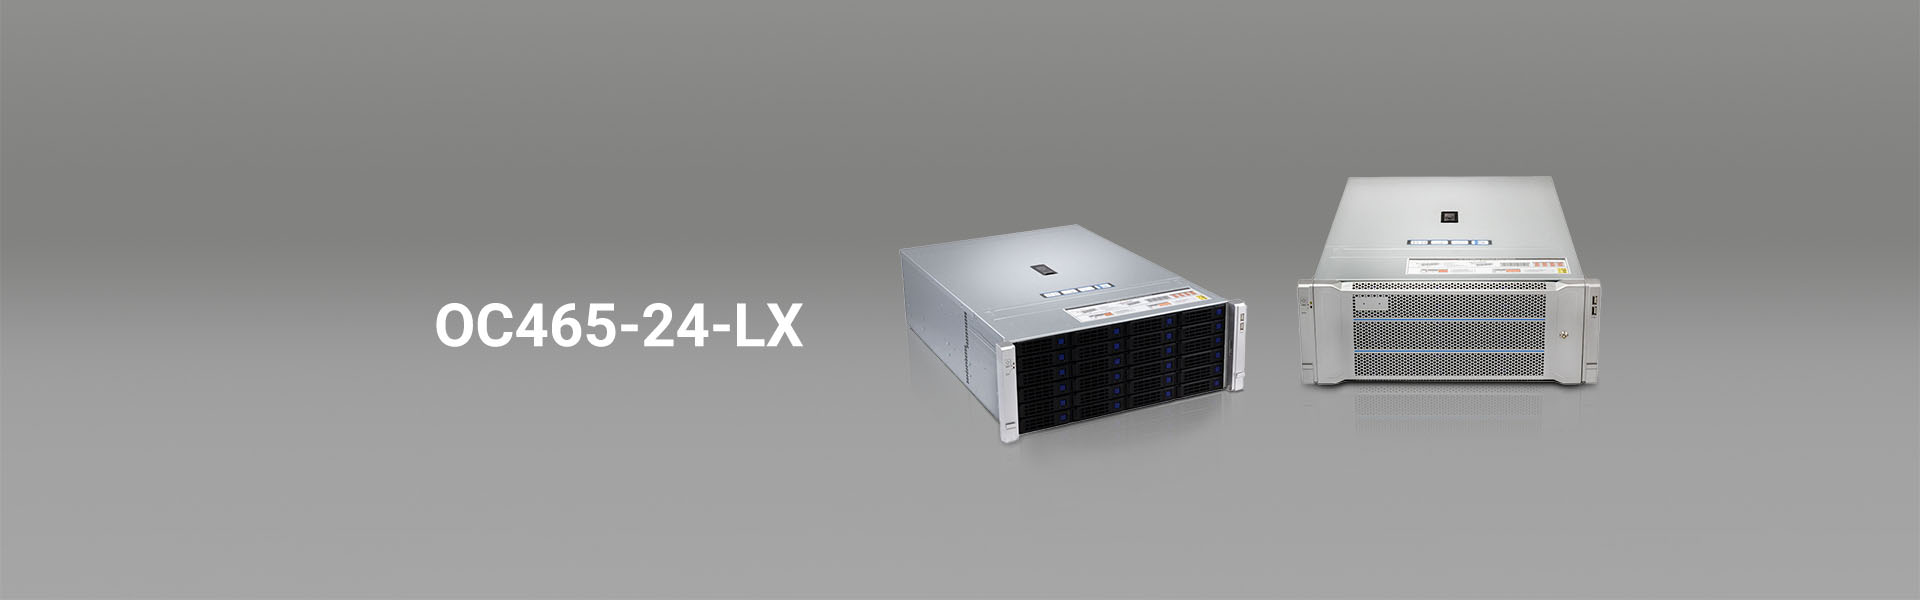 server chassis-hot swap chassis-onechassis -OC465-24-LX -banner